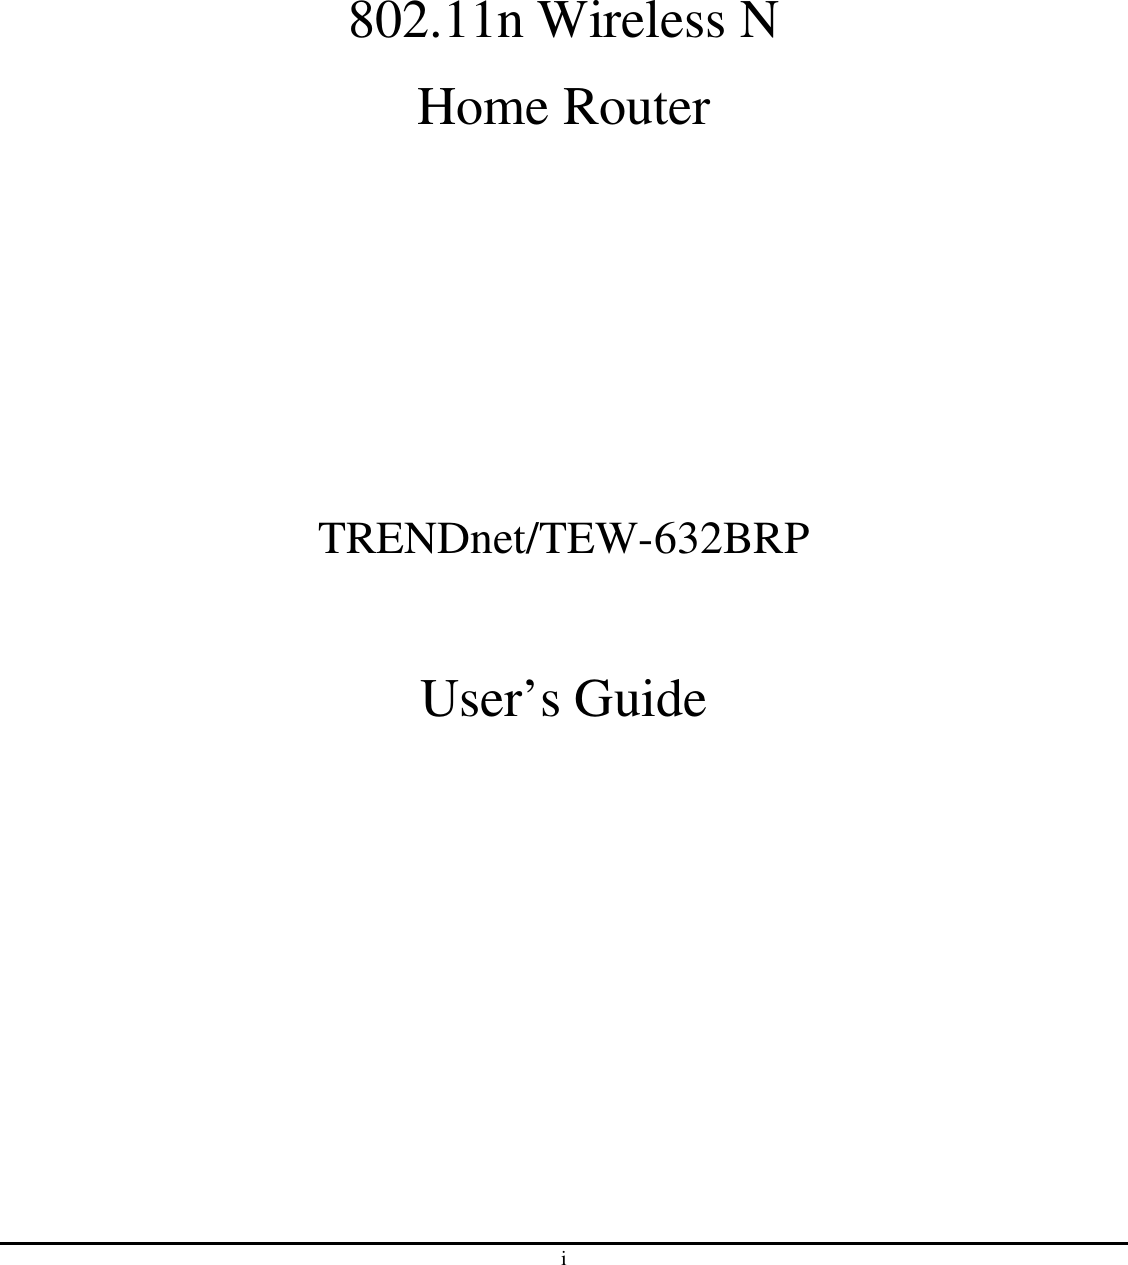 i    802.11n Wireless N Home Router     TRENDnet/TEW-632BRP  User’s Guide             